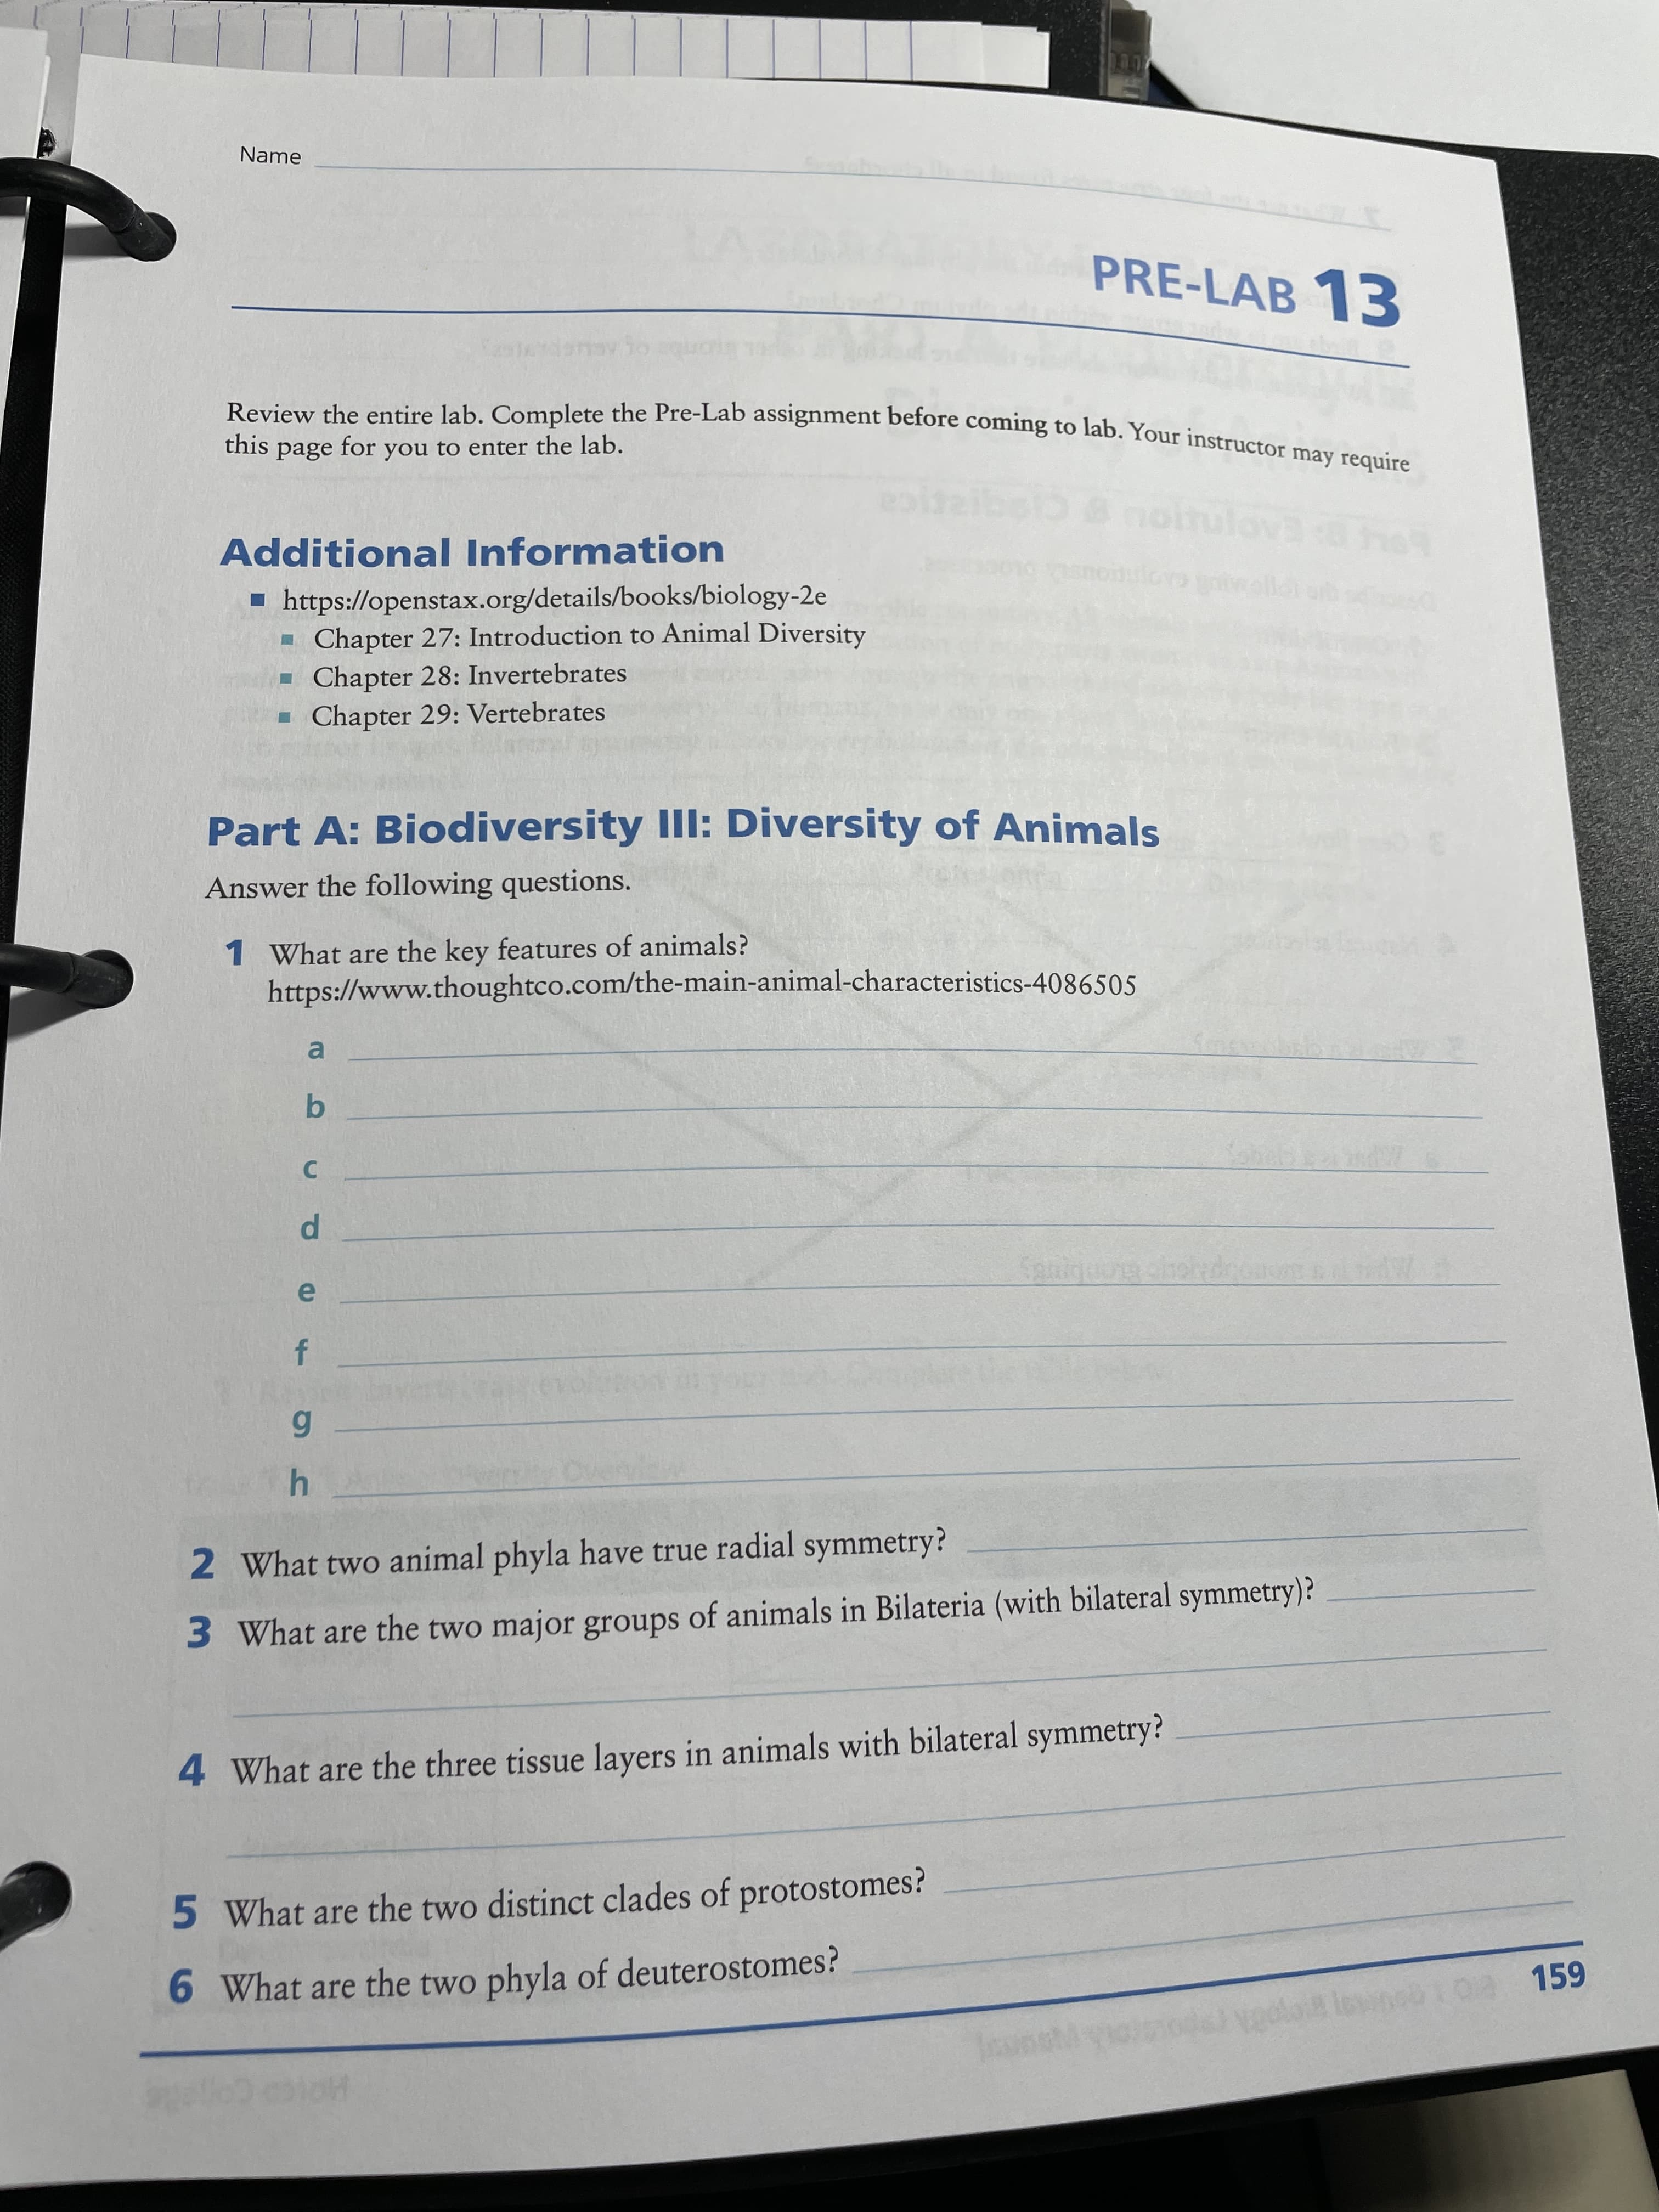 Pi
Name
PRE-LAB 13
this
page
for
Additional Information
EADE
▪ https://openstax.org/details/books/biology-2e
Chapter 27: Introduction to Animal Diversity
Chapter 28: Invertebrates
Chapter 29: Vertebrates
Part A: Biodiversity III: Diversity of Animals
Answer the following questions.
1 What are the key features of animals?
https://www.thoughtco.com/the-main-animal-characteristics-4086505
a.
b.
C.
2 What two animal phyla have true radial symmetry?
3 What are the two major groups of animals in Bilateria (with bilateral symmetry)?
4 What are the three tissue layers in animals with bilateral symmetry?
5 What are the two distinct clades of protostomes?
6 What are the two phyla of deuterostomes?
losinebt 0a 159
Ho coe
